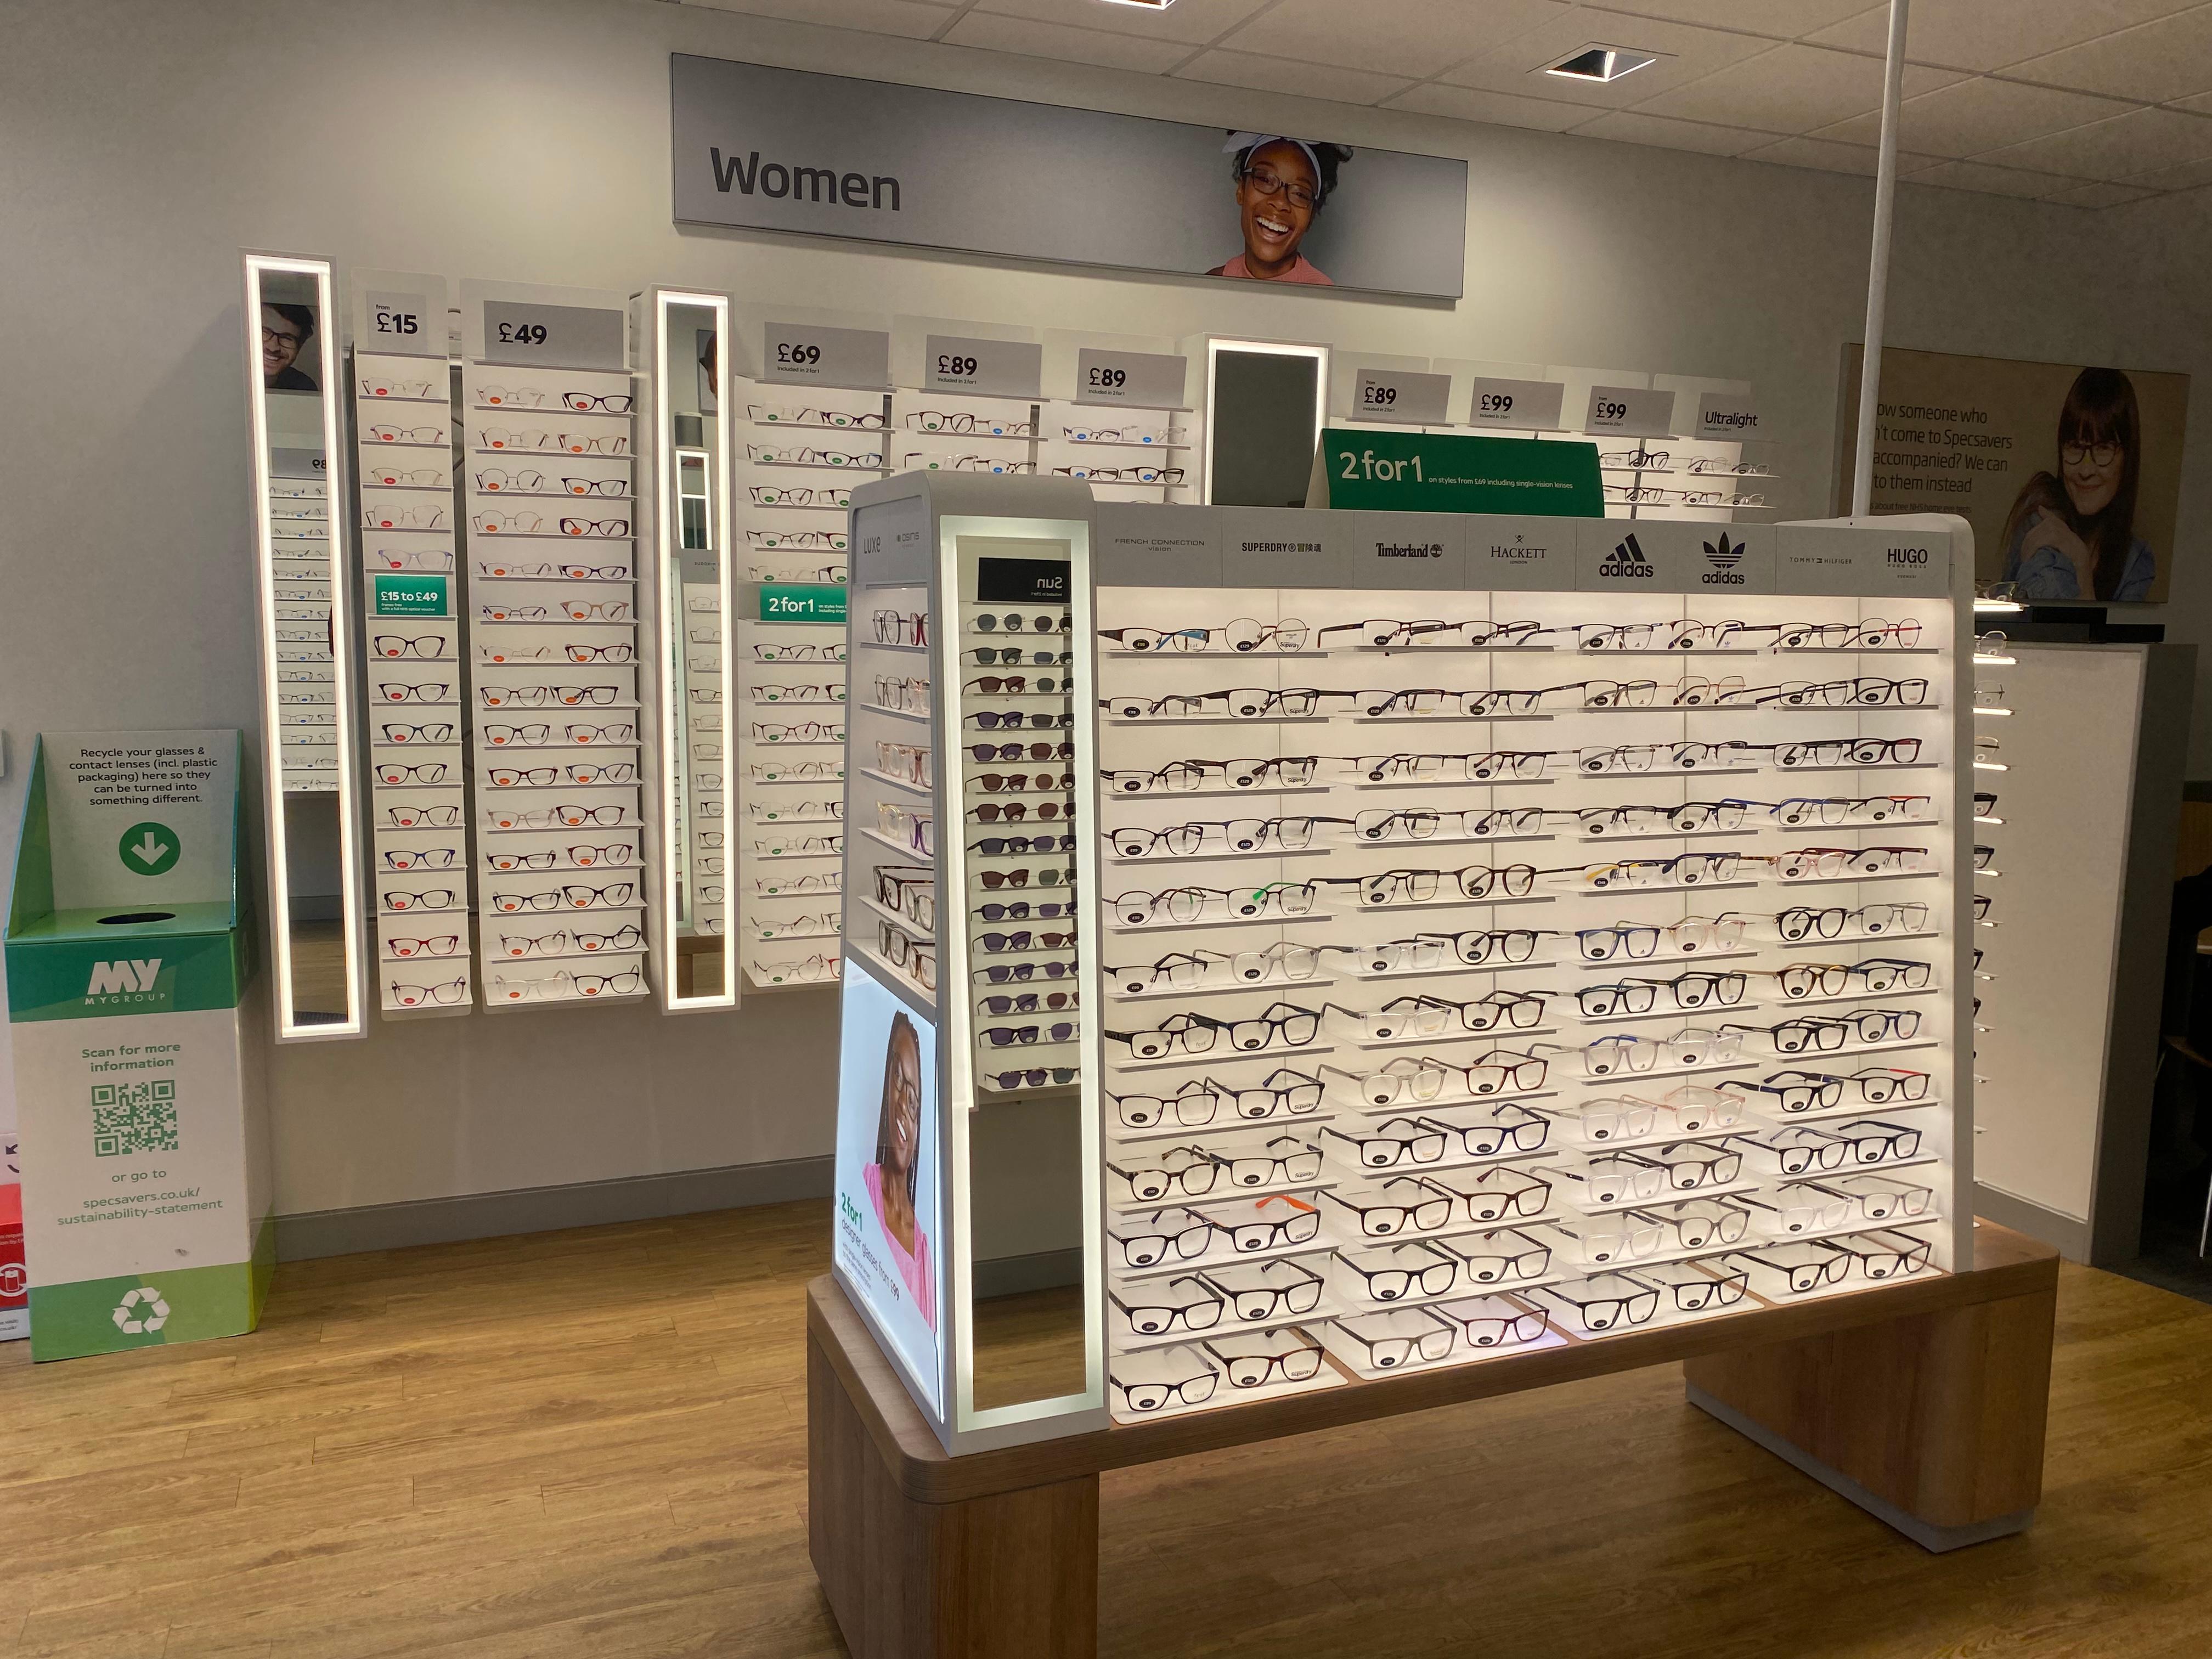 Images Specsavers Opticians and Audiologists - Swanley